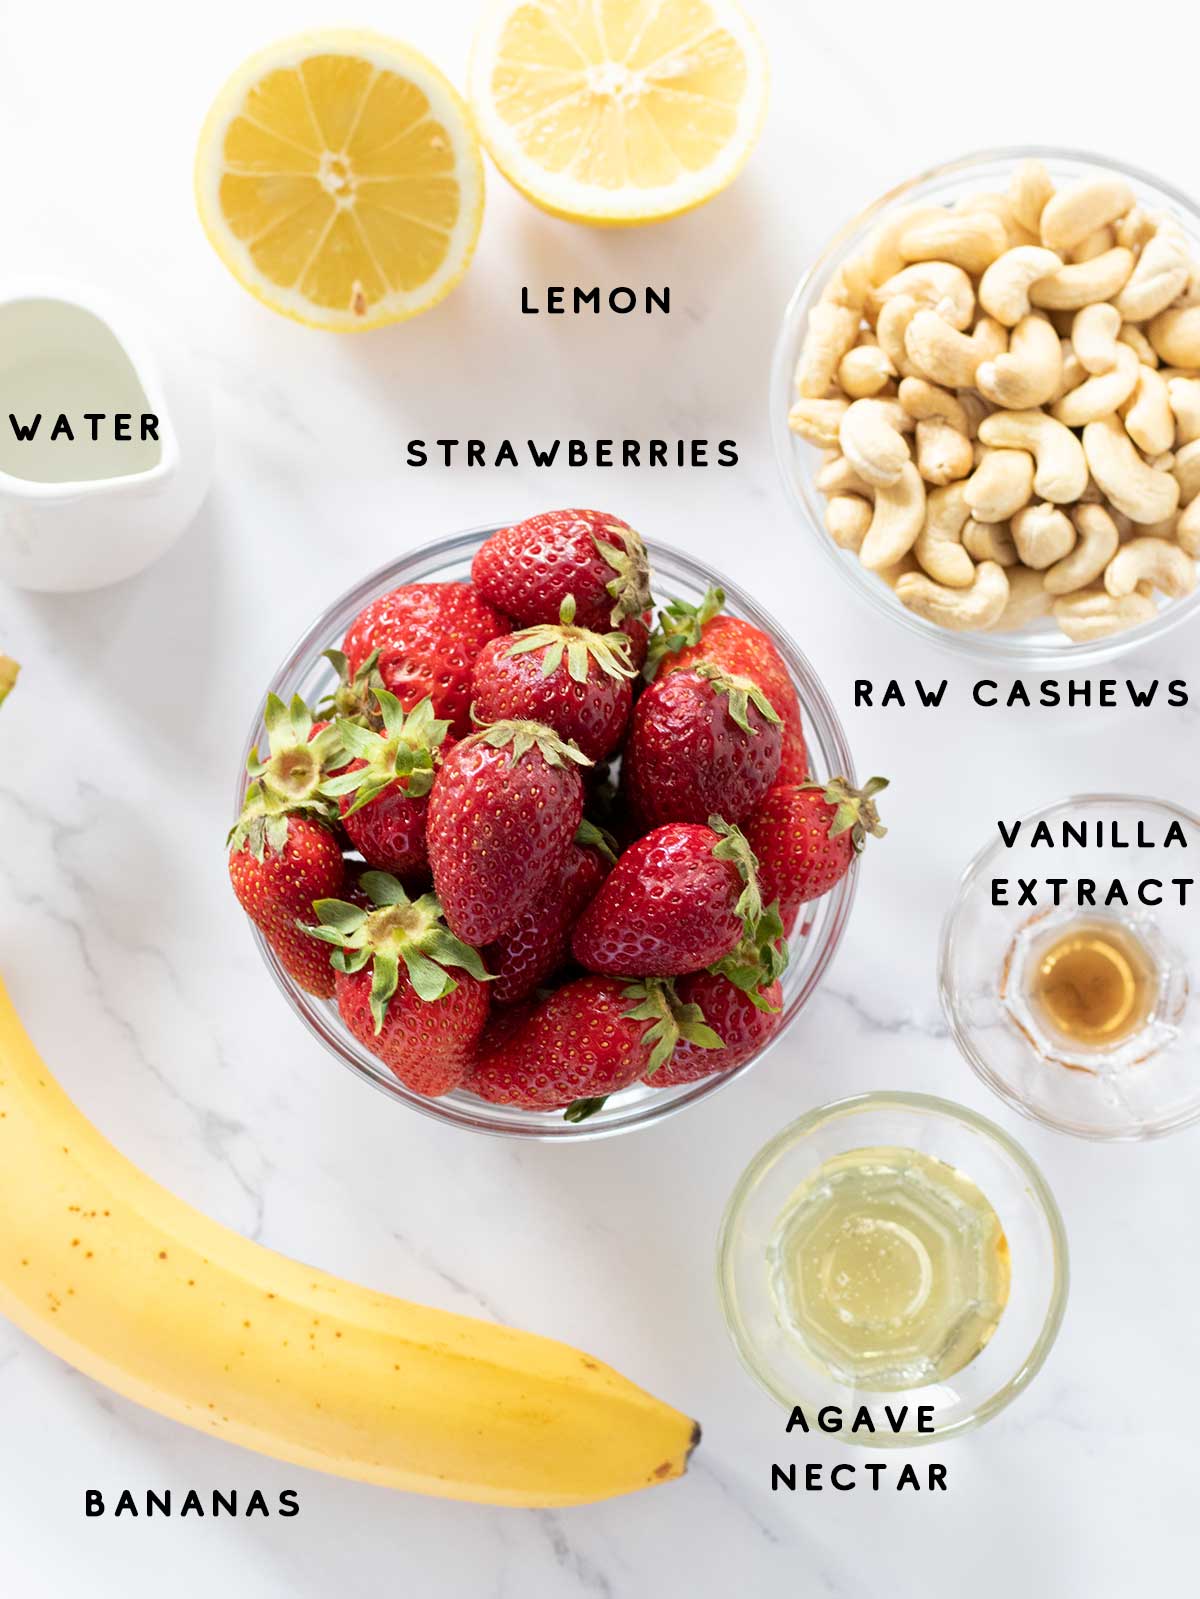 Simple plant-based ingredients for preparing easy cheesecake salad with fresh summer fruit: strawberries, bananas, raw cashews, lemon juice, agave nectar, vanilla extract, and water.